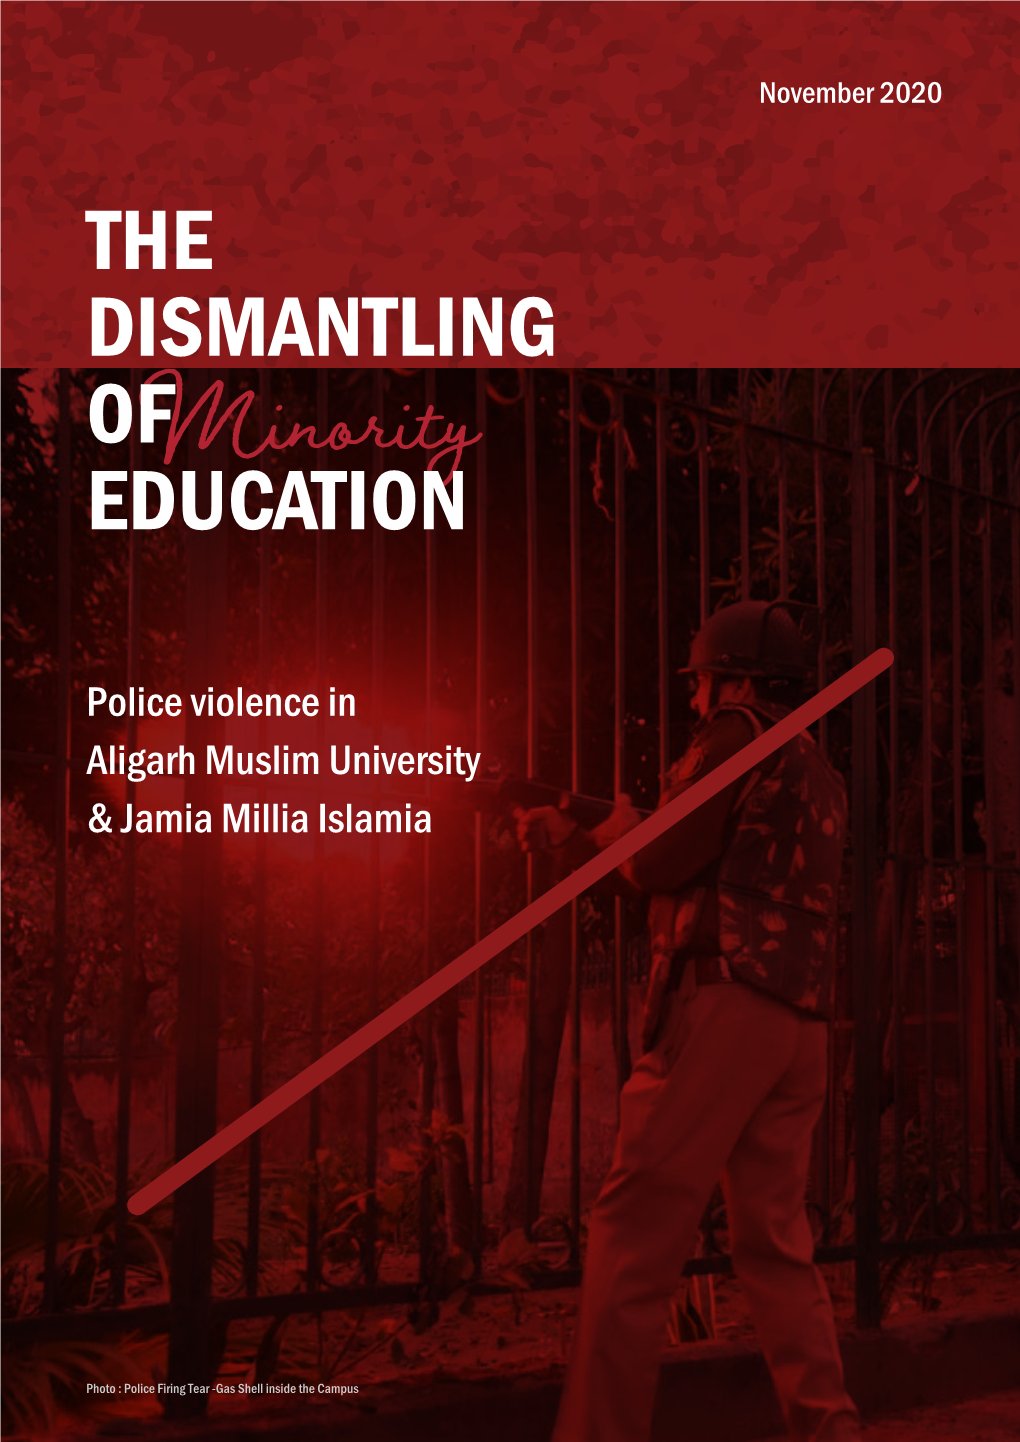 Dismantling of Minority Education – Violence Against JMI And